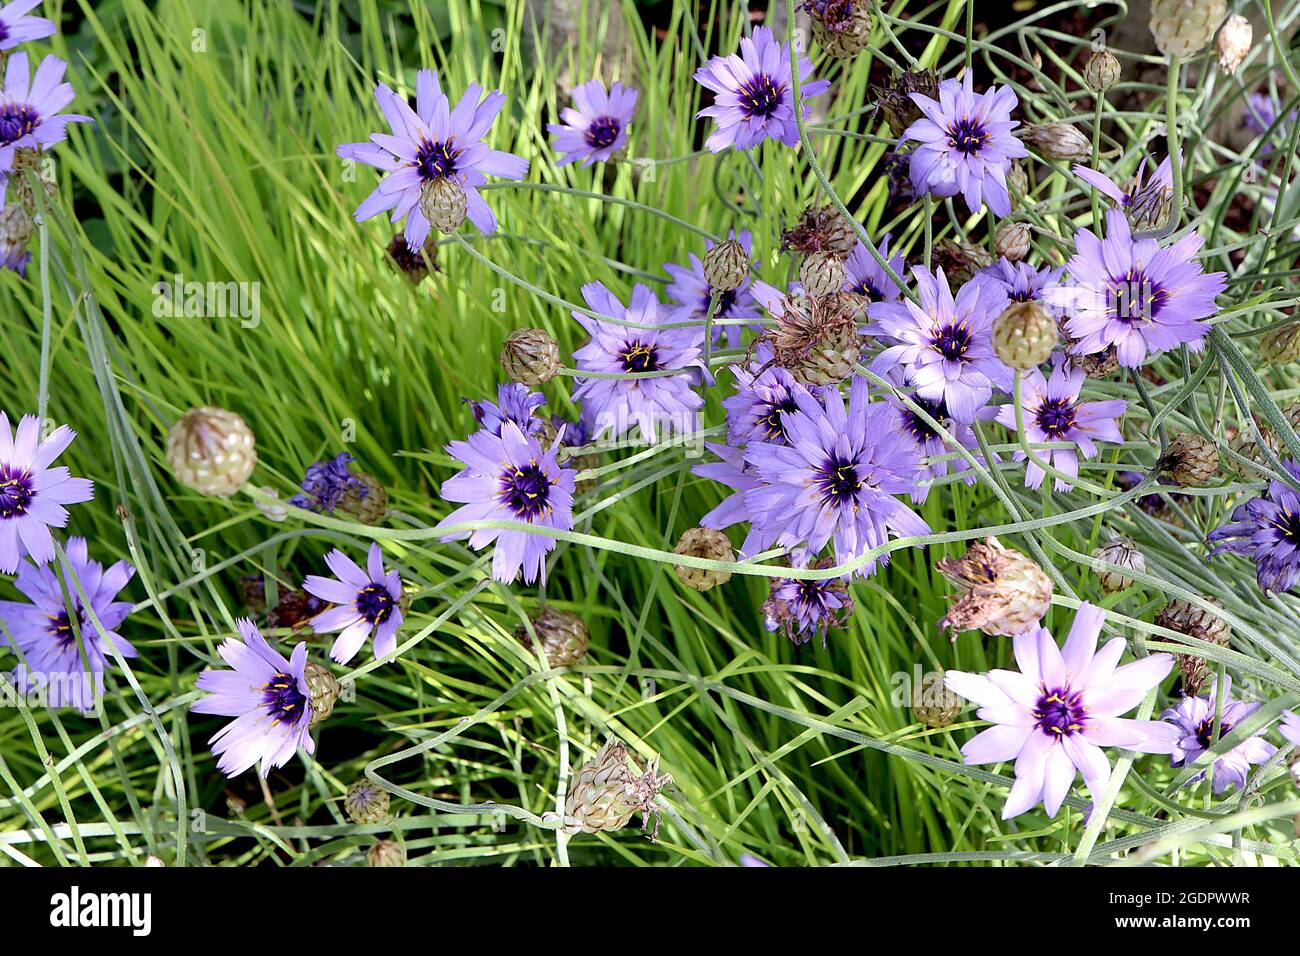 Catananche caerulea ‘Major’ Cupid’s dart Major – lavender blue flowers with crimped petals and dark purple centre,  July, England, UK Stock Photo